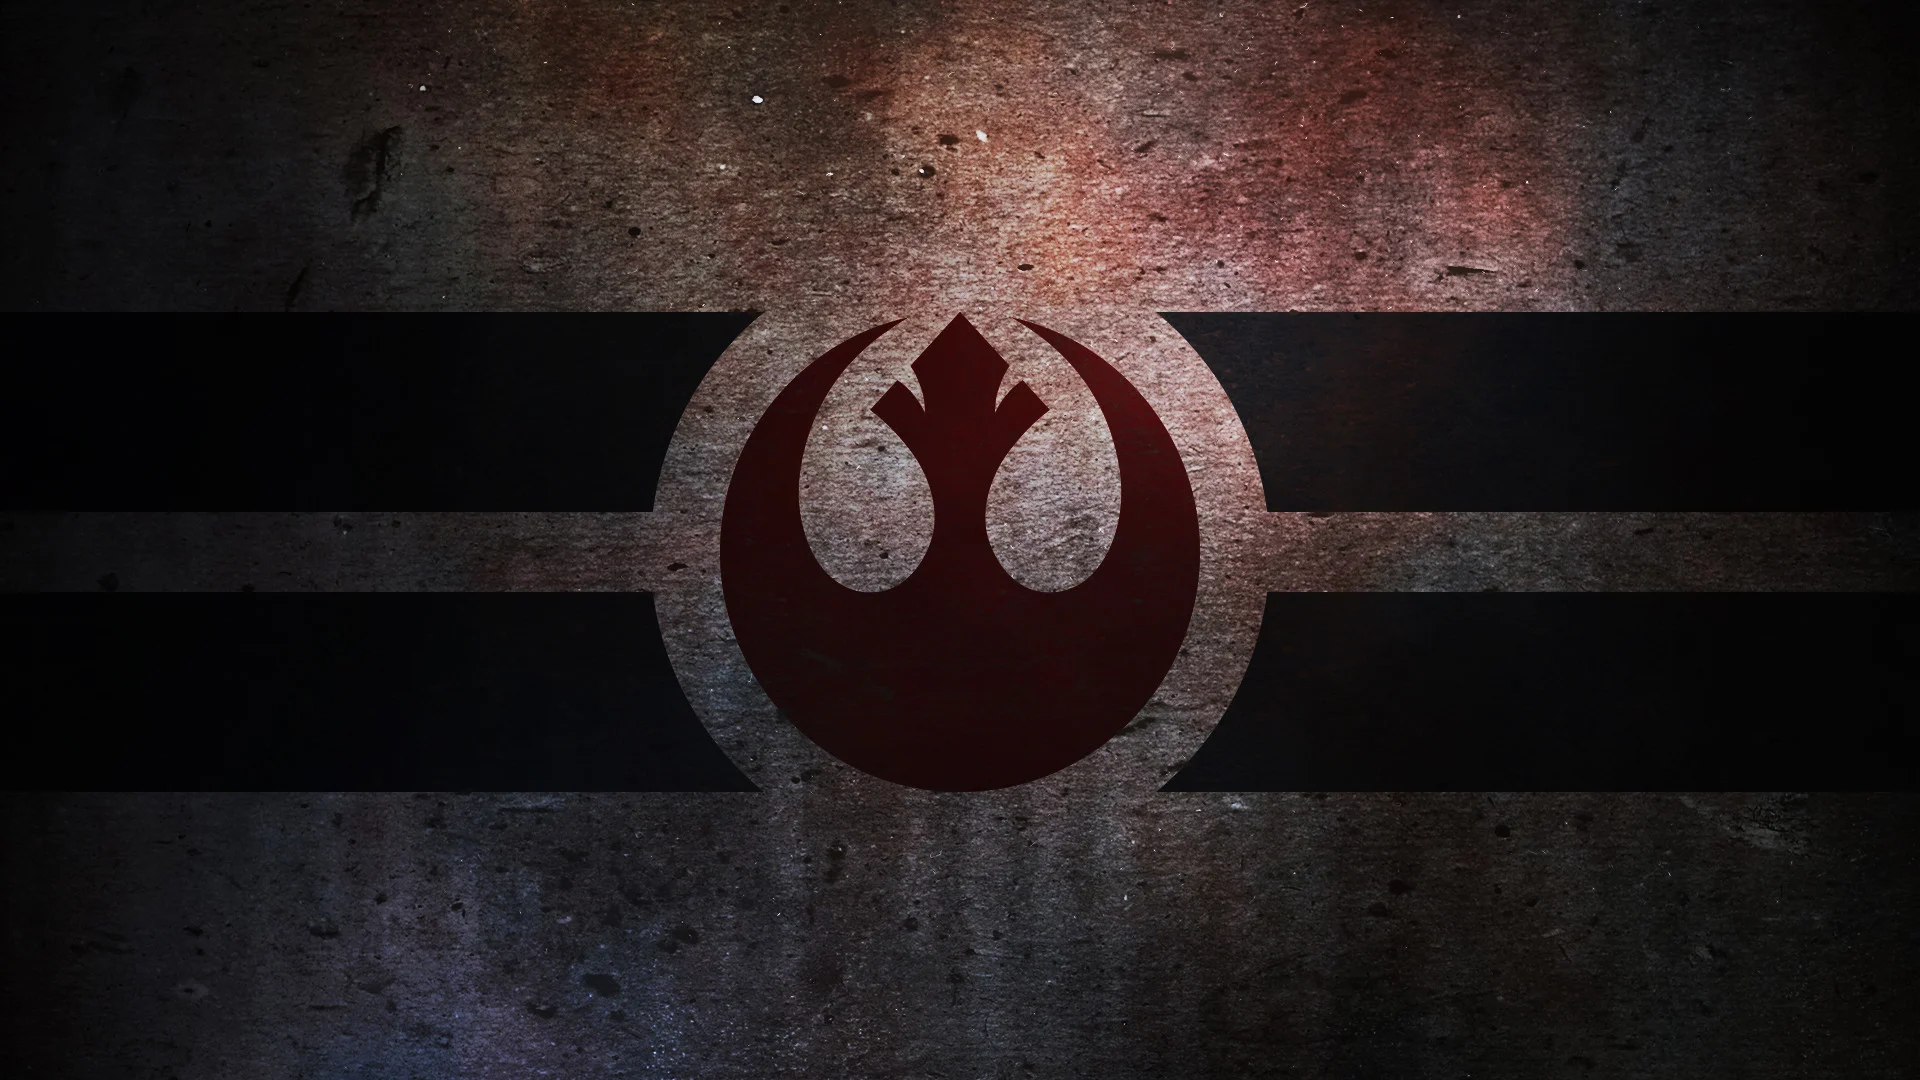 Fiction wallpaper hd star wars jedi wallpapers for iphone at